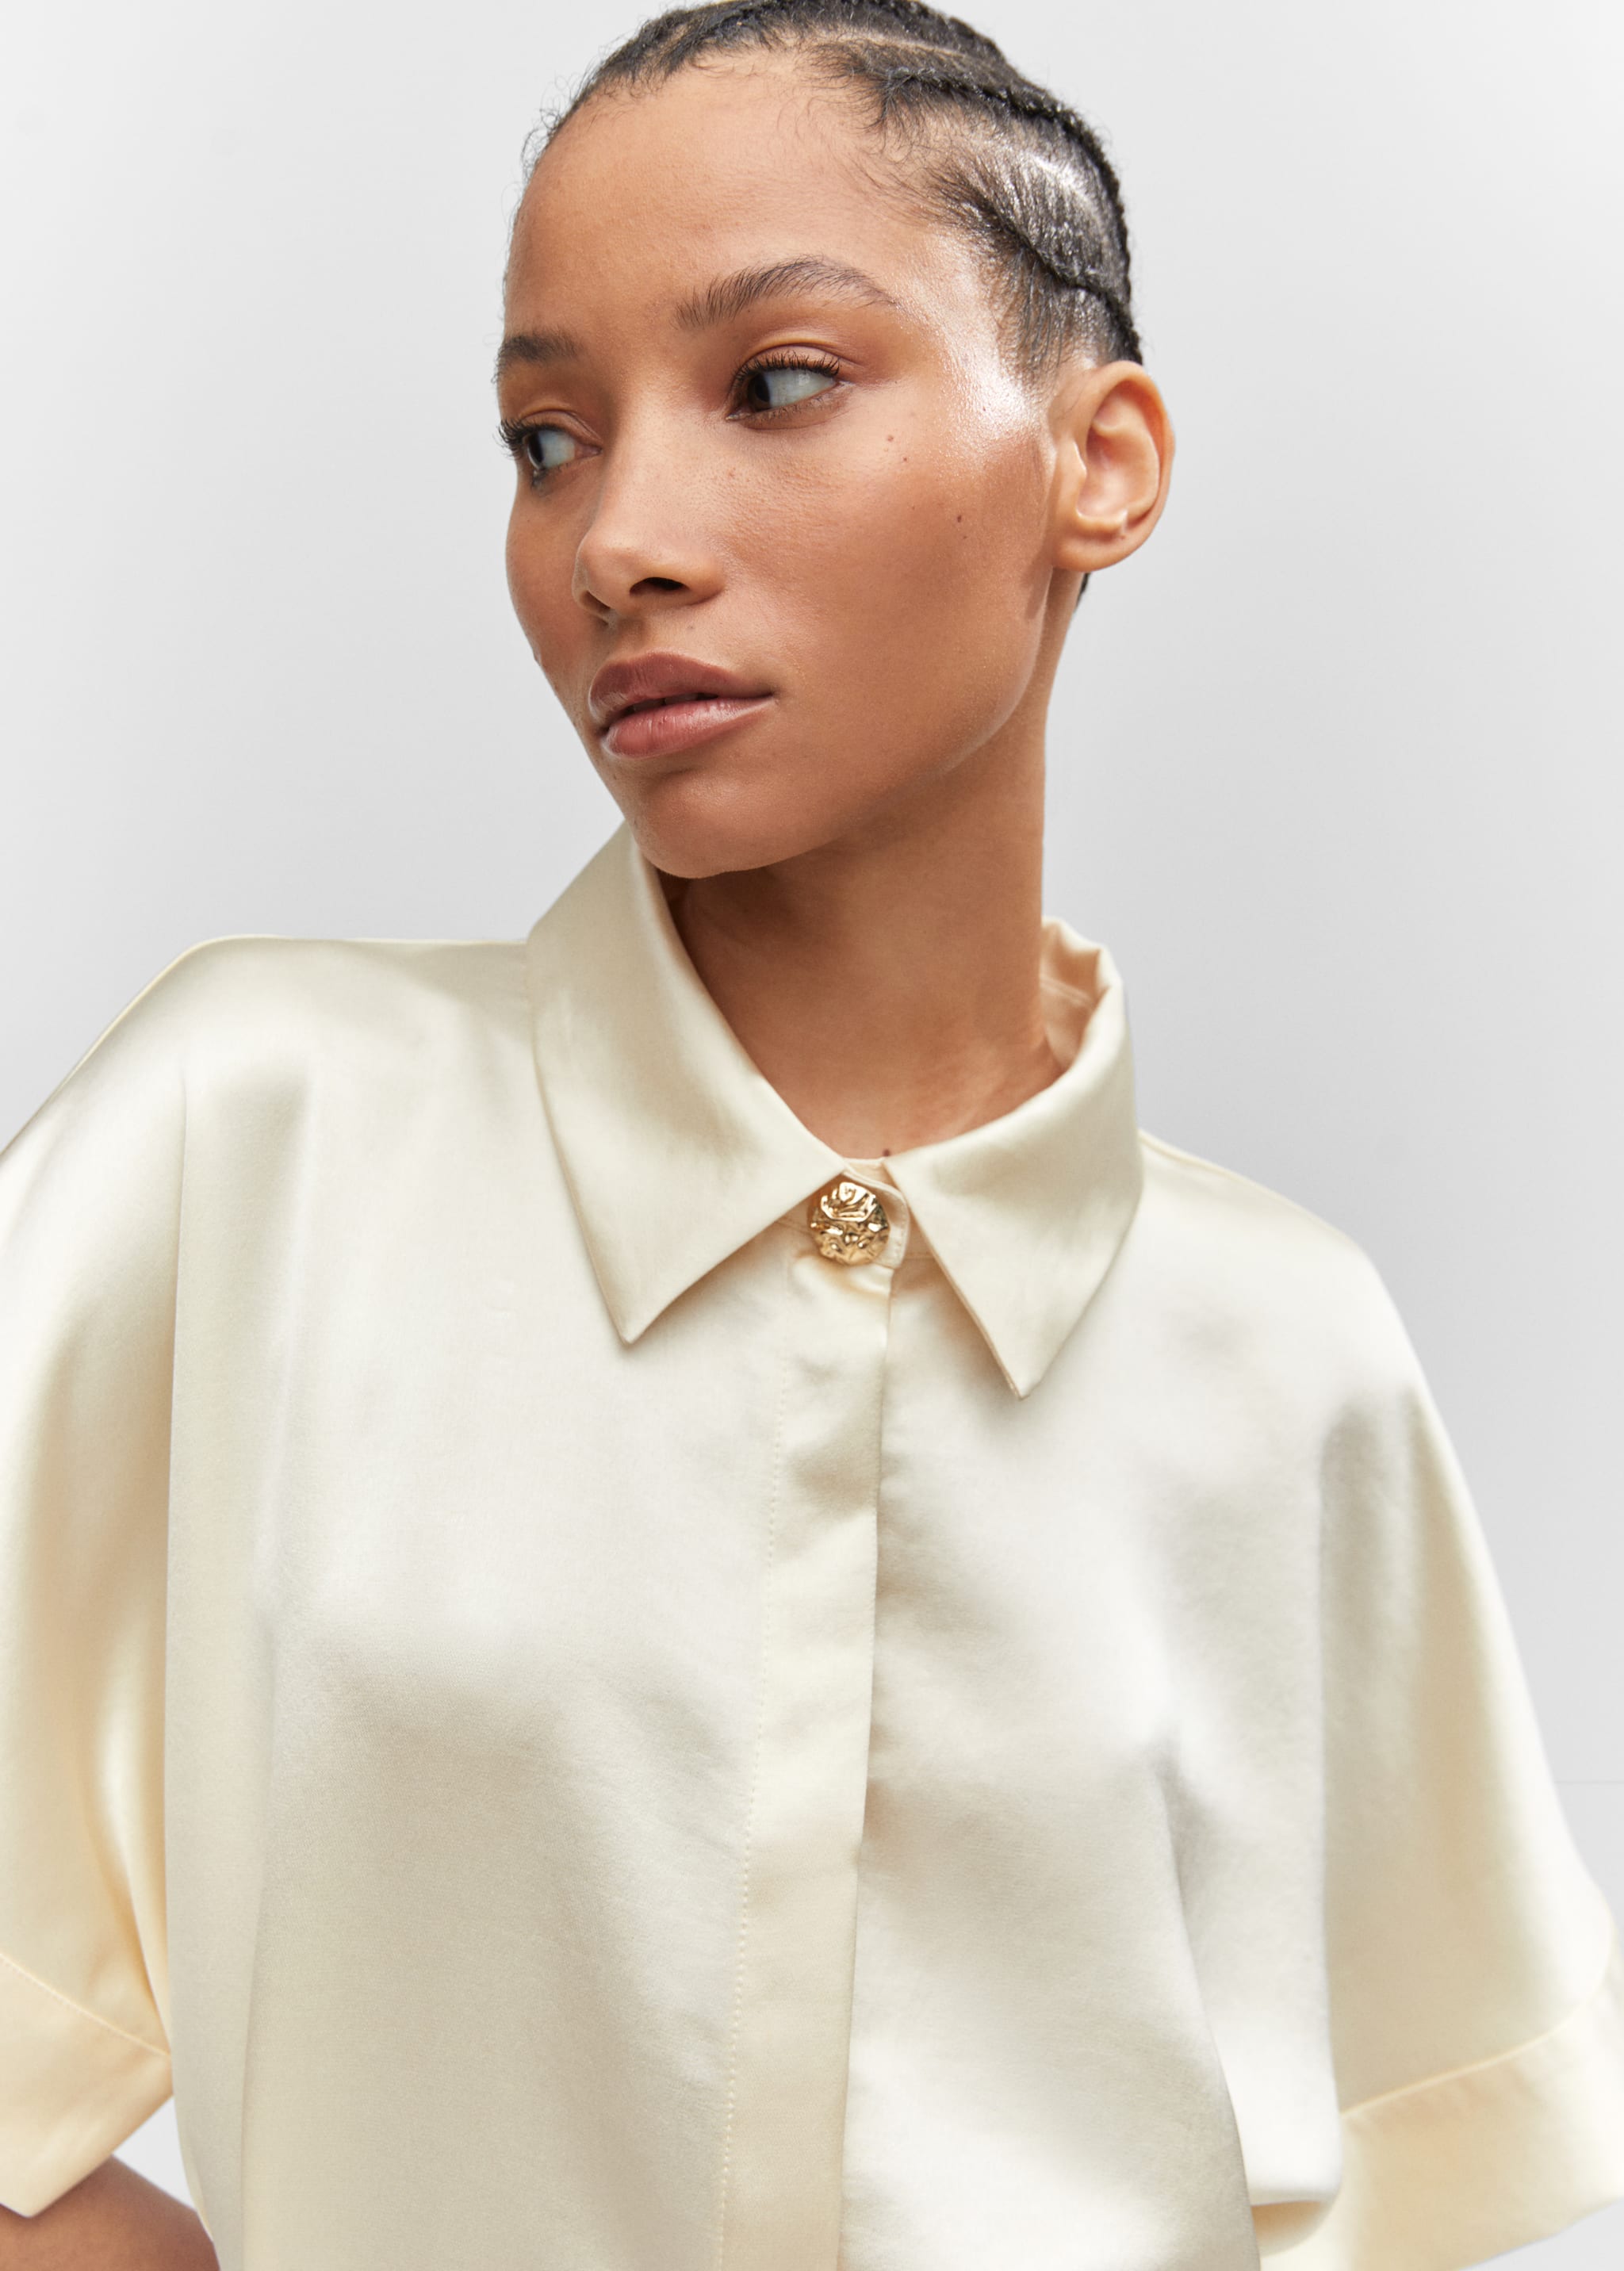 Satin shirt dress - Details of the article 1